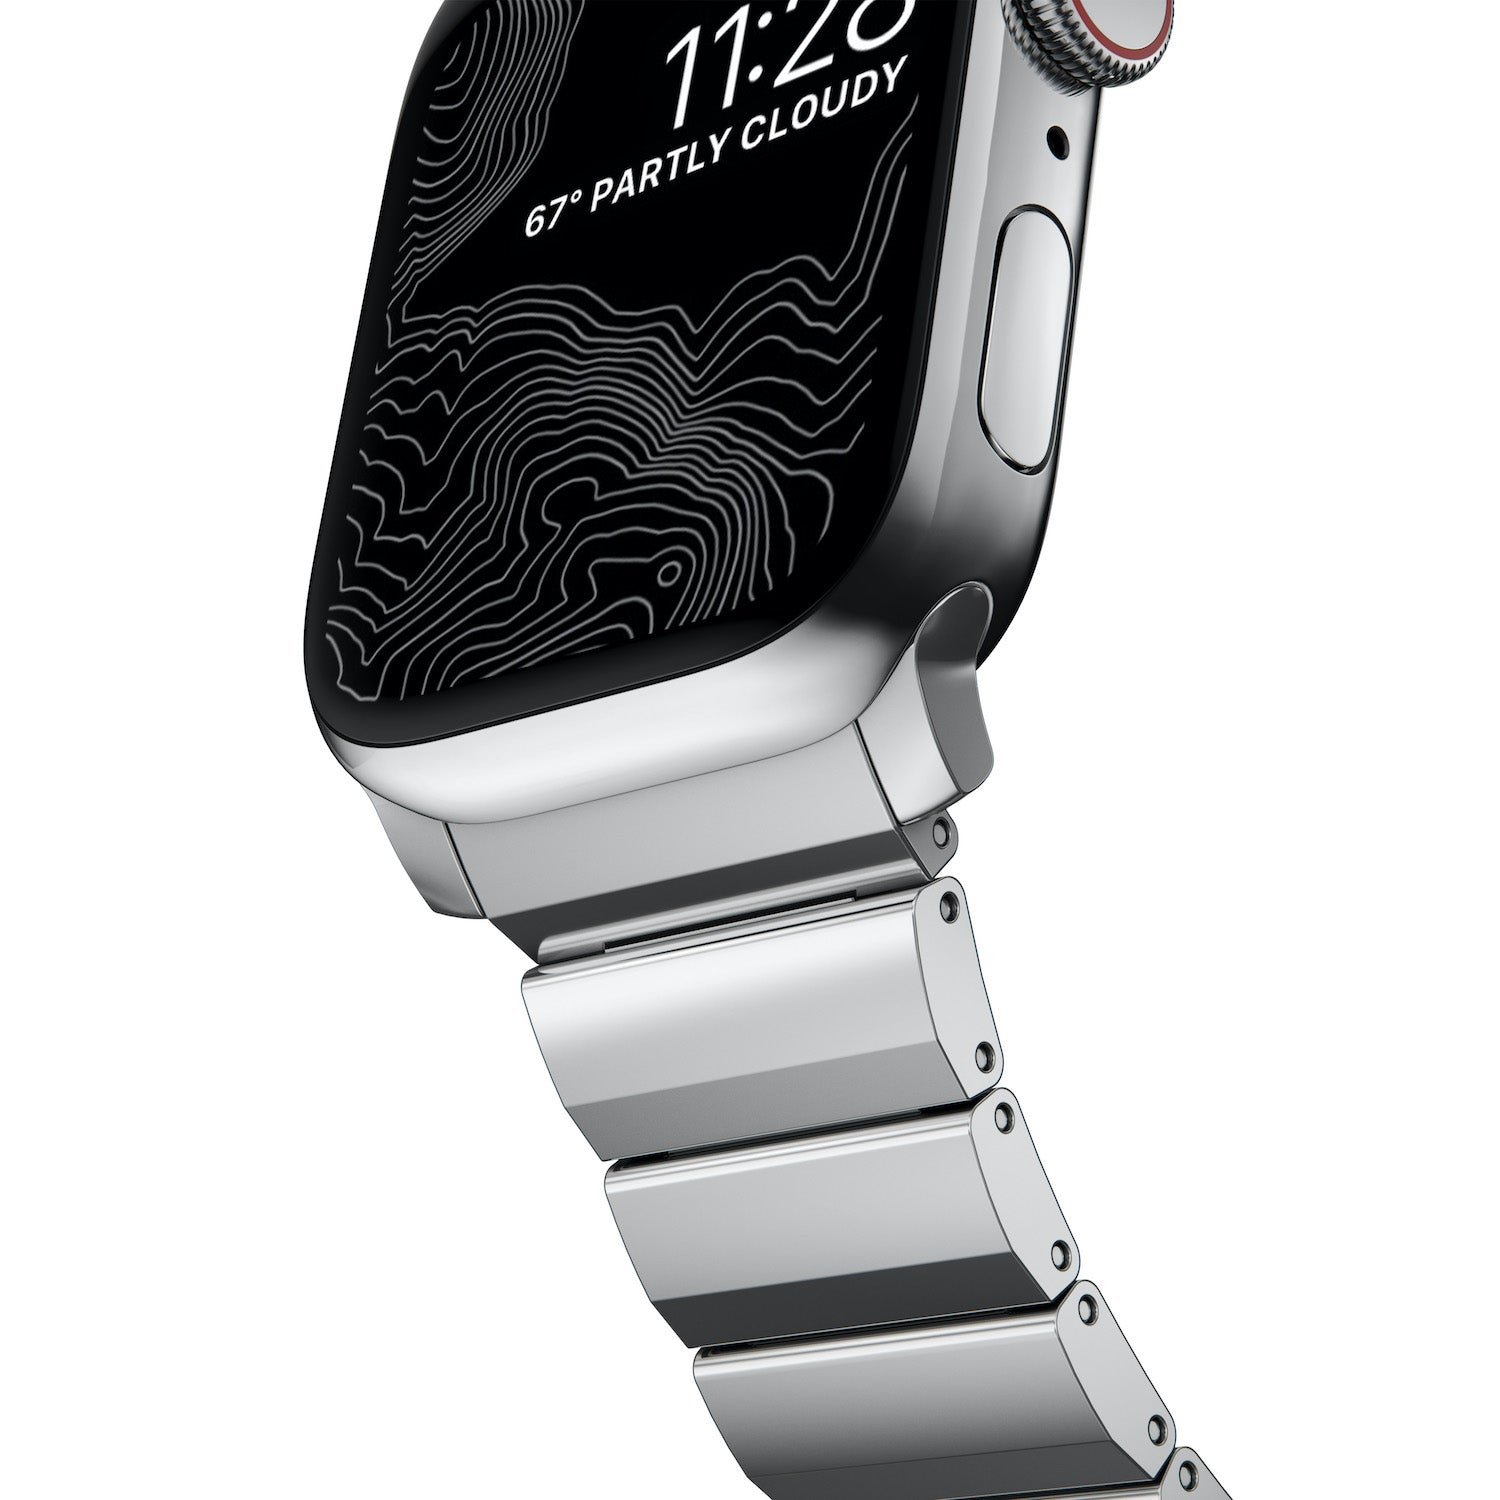 Stainless Steel Band for Apple Watch 40/41mm - Silver